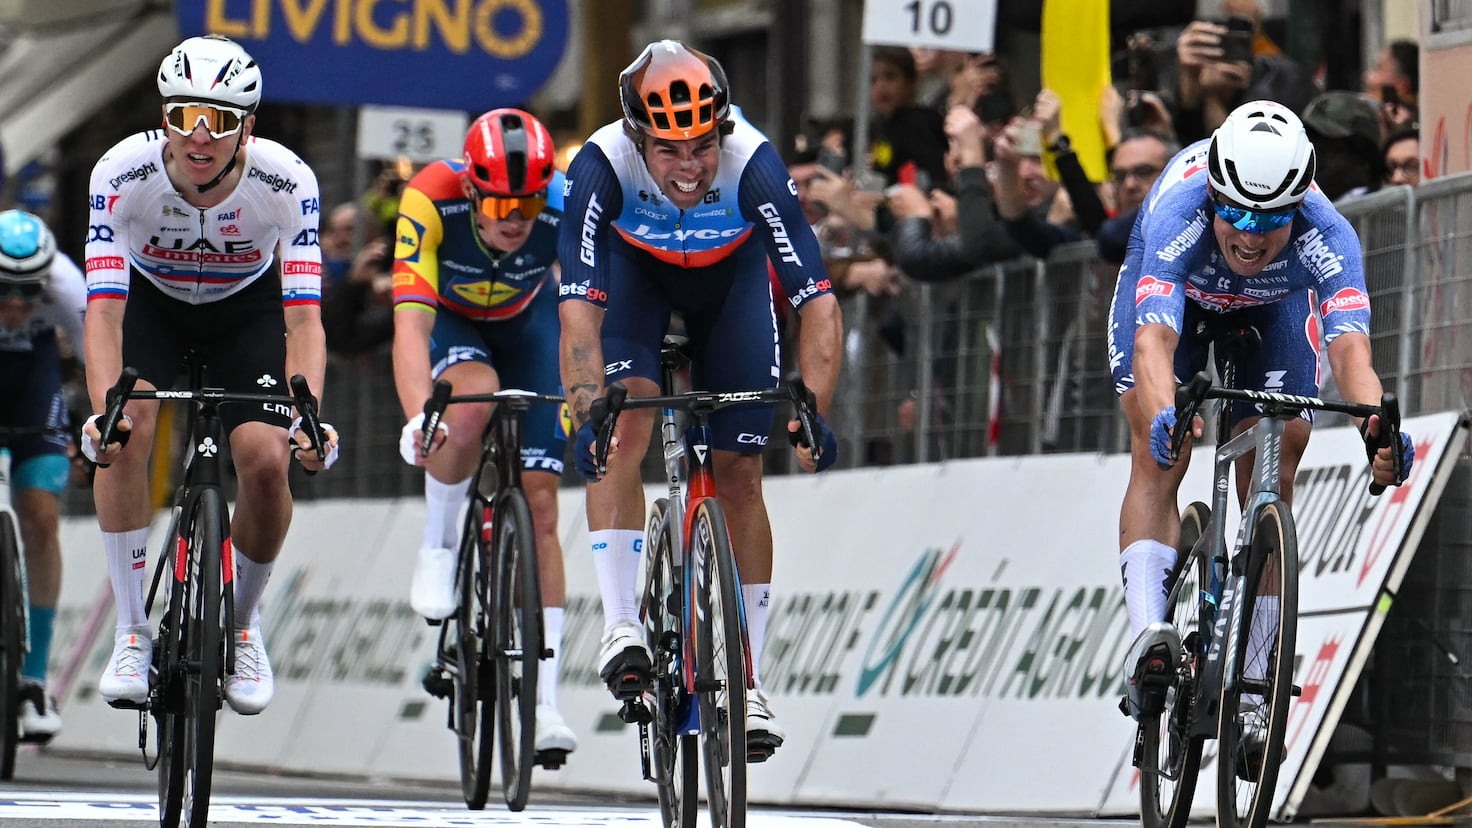 Philipsen steals victory from Pogacar in the fastest Milan-San Remo in history

